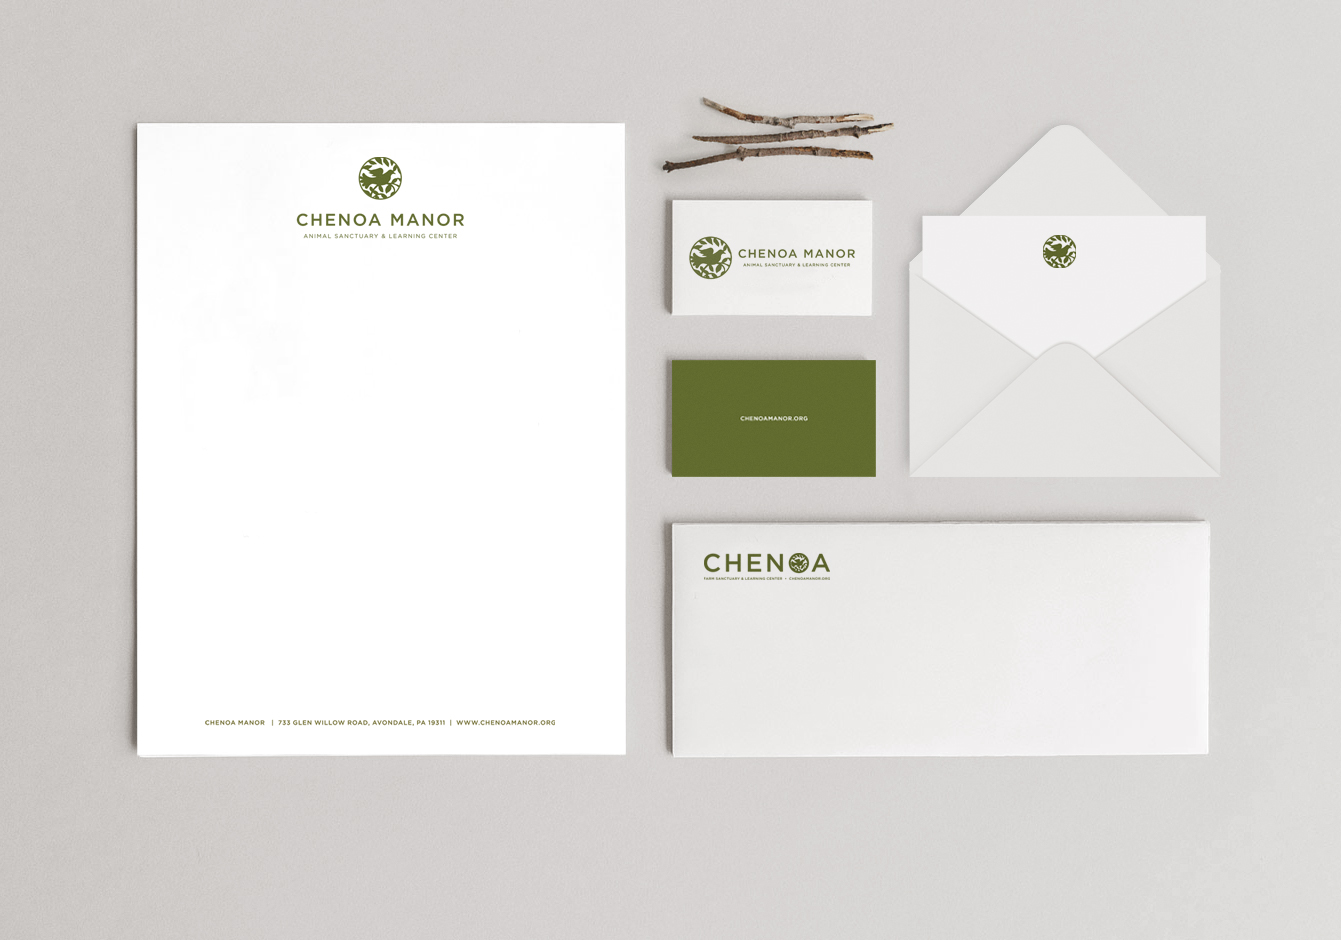 The Artful Union worked with Chenoa Manor, a non-profit animal sanctuary to create an impactful brand and clean, modern stationery.